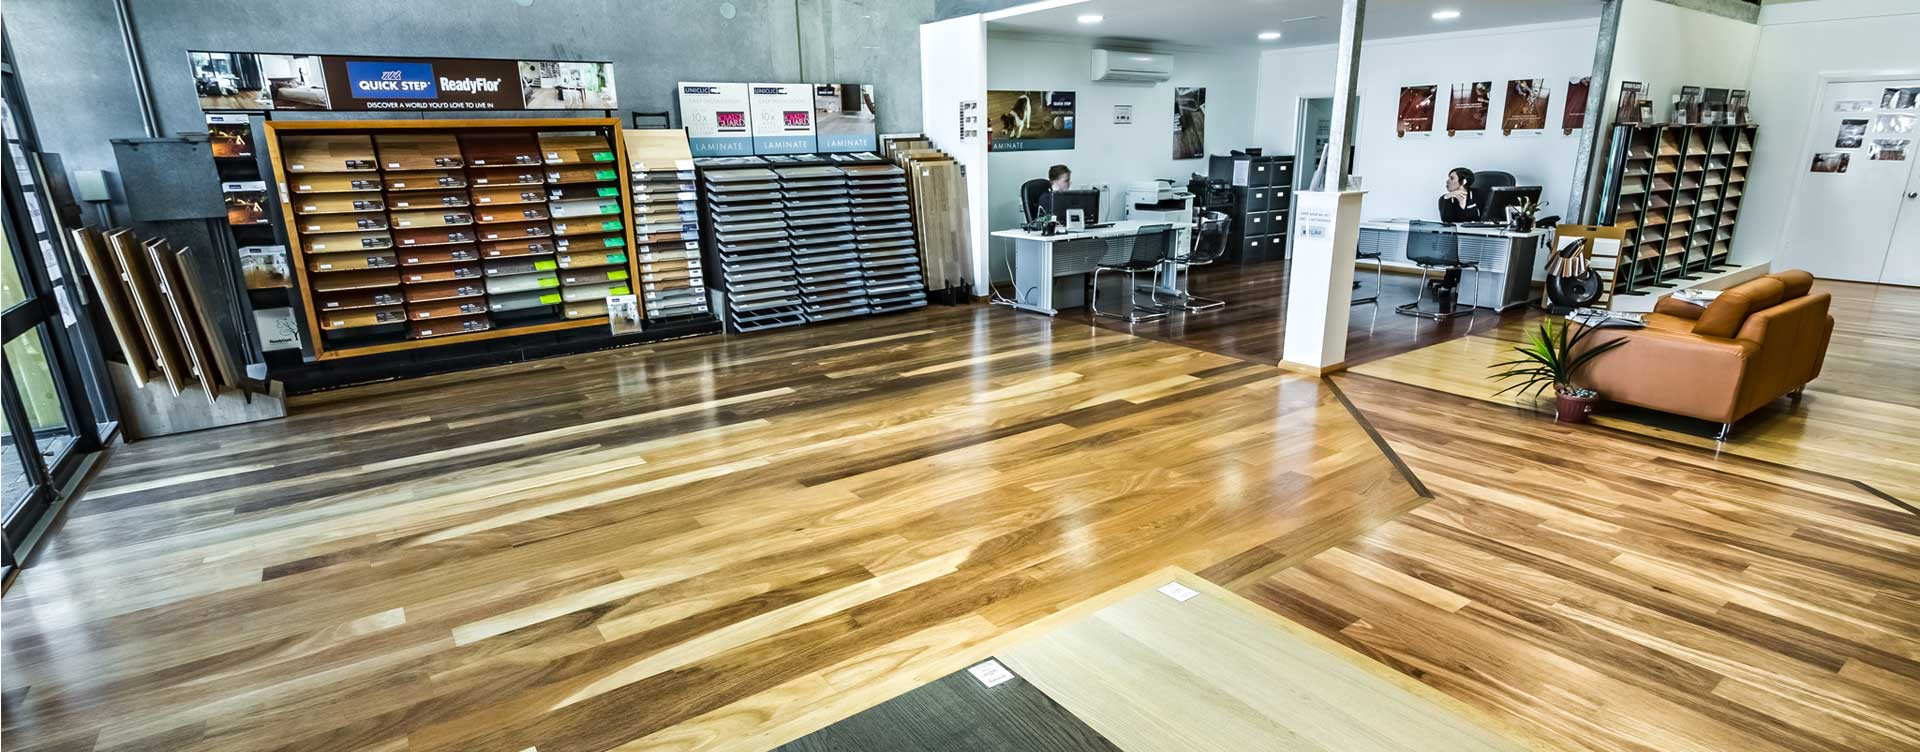 Hardwood Floor Color Trends 2016 Of Timber Flooring Perth Coastal Flooring Wa Quality Wooden Throughout thats why they Call Us the Home Of Fine Wood Floors